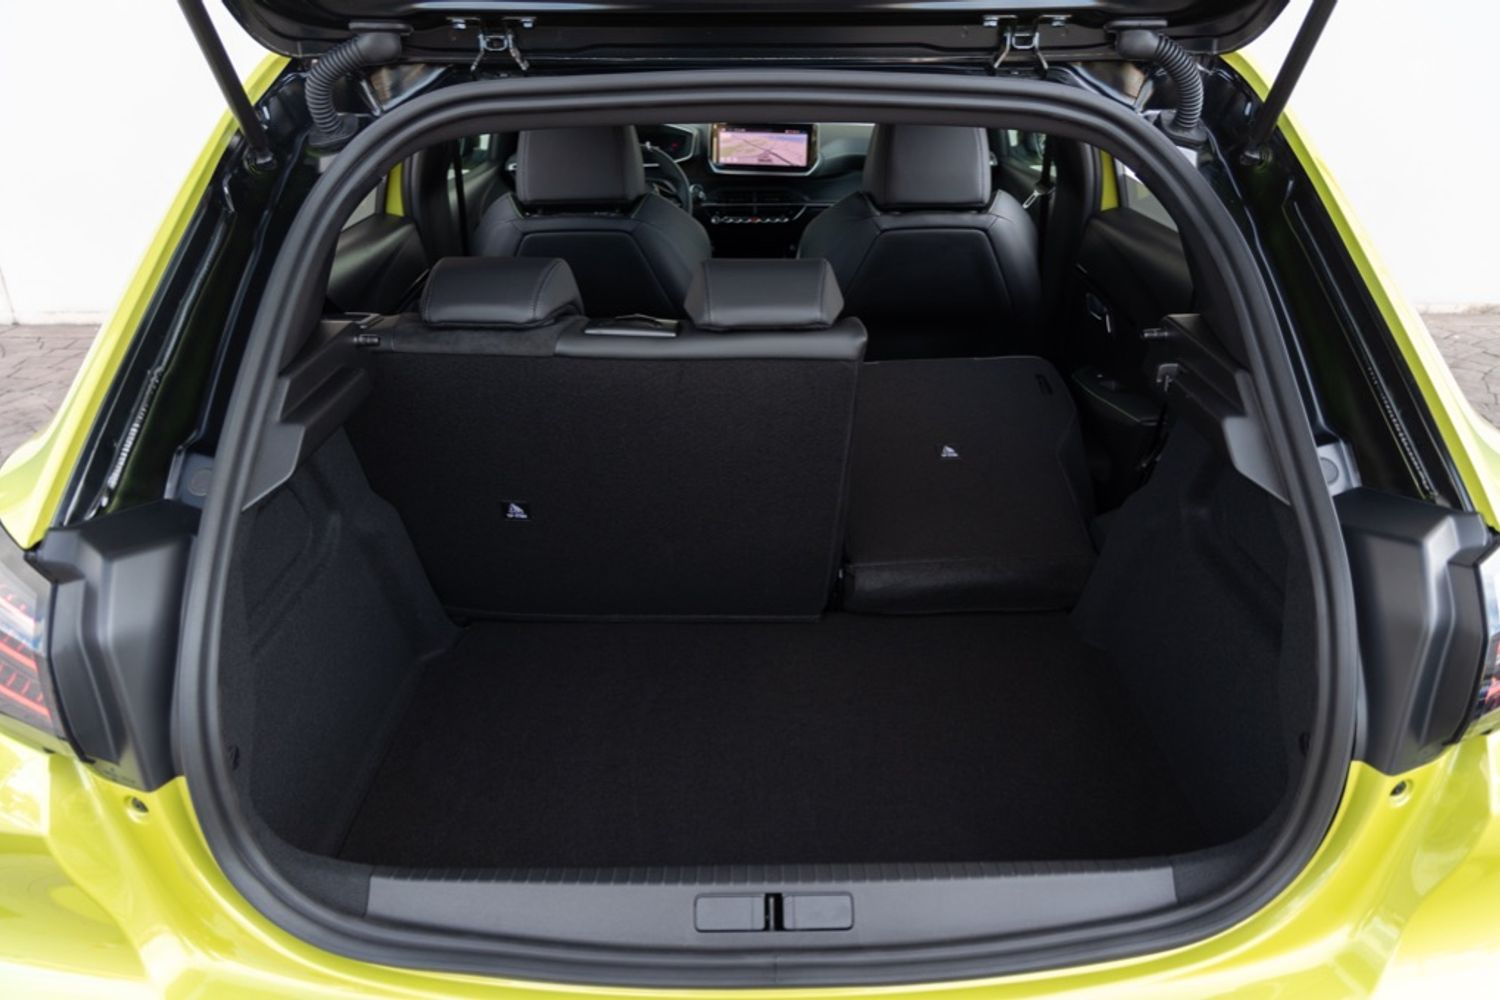 Peugeot E208 Practicality and Boot Space